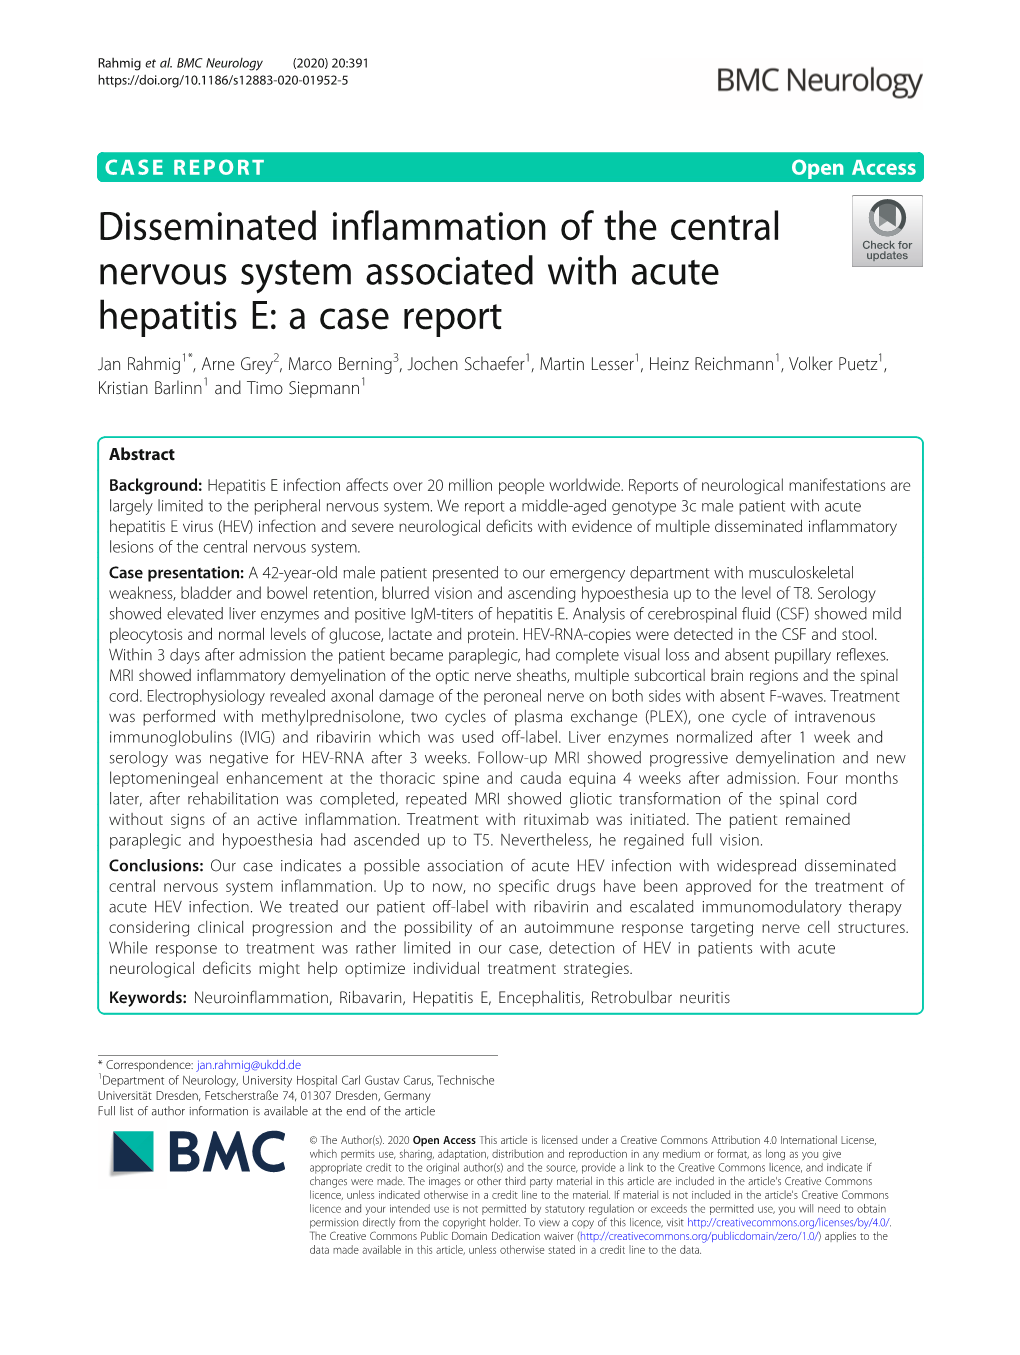 Disseminated Inflammation of the Central Nervous System Associated